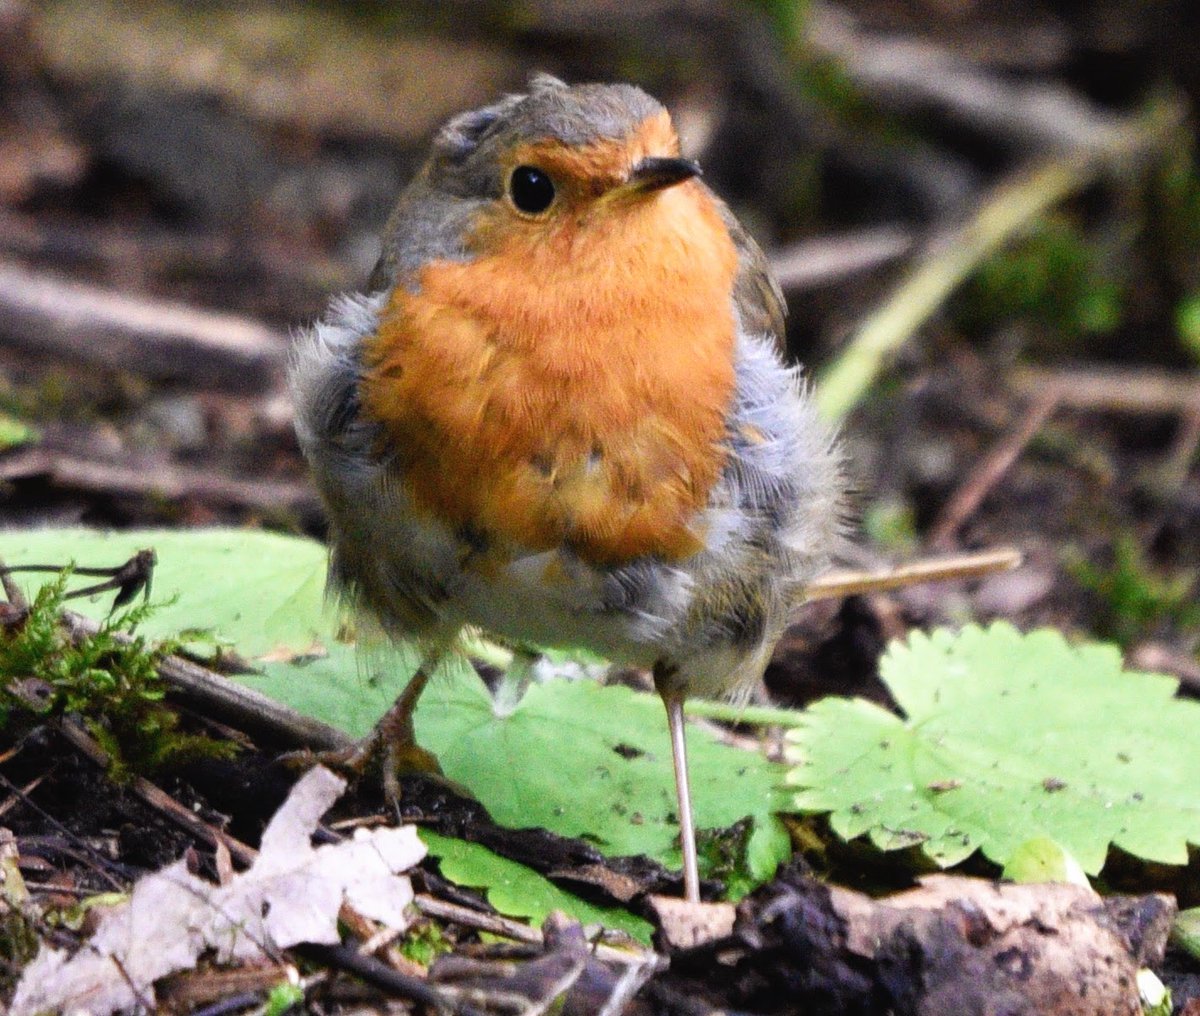 Another little cutie from yesterday was this dear little robin. Quite small and although not showing it barely had any tail feathers. Possibly an early hatch from the Spring already achieved it's red breast. #robins #birds #NaturePhotography